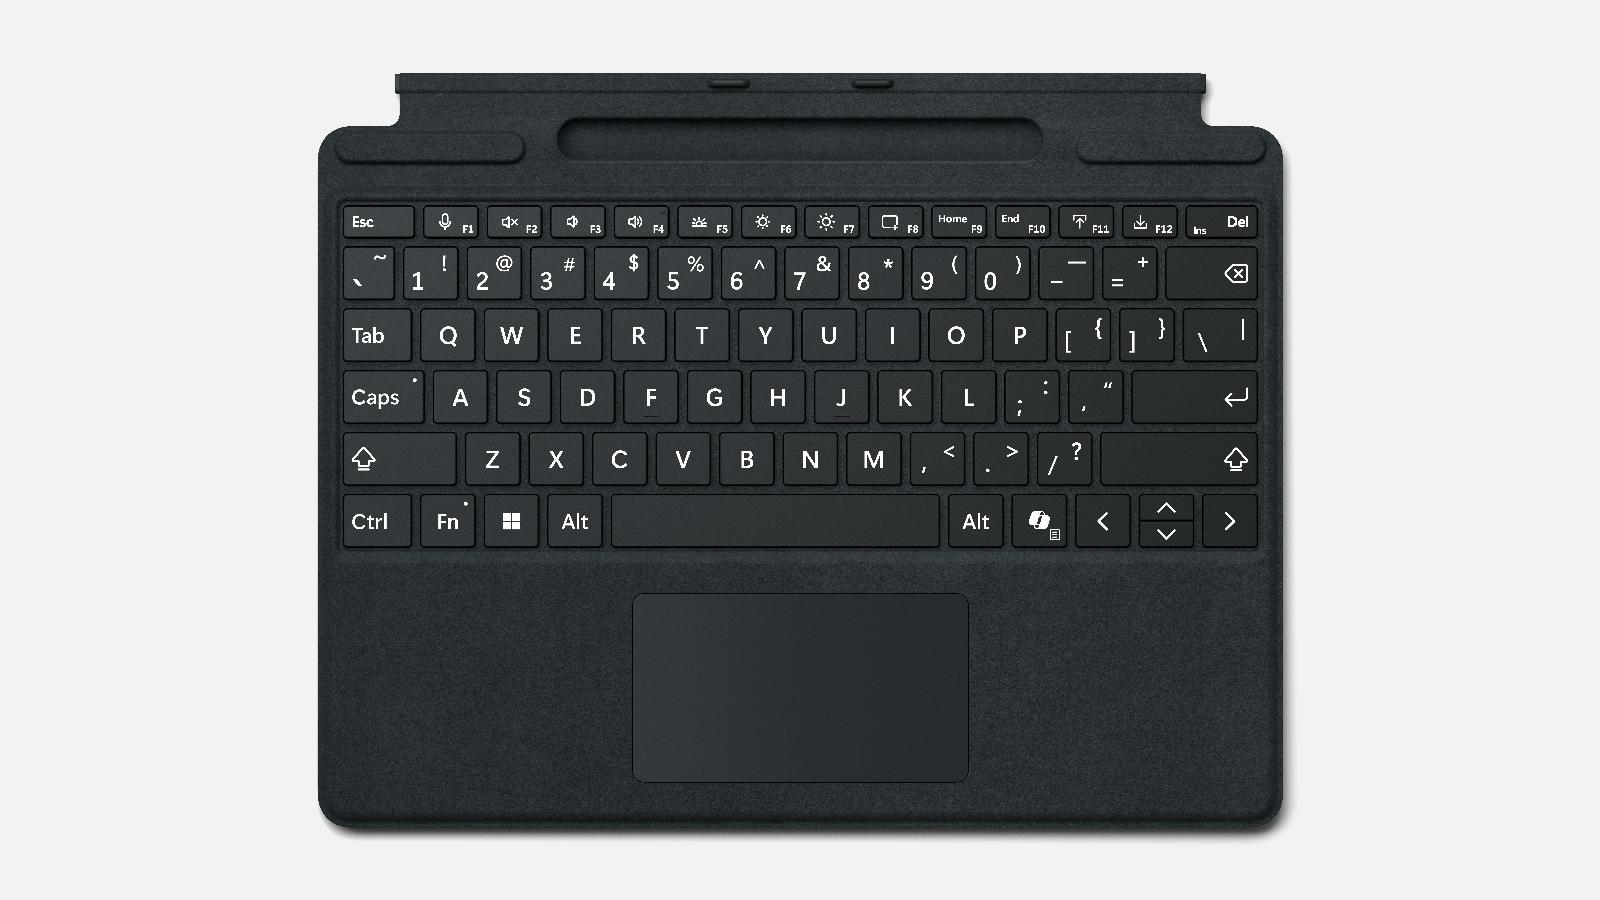 Copilot gets its own key on Microsoft’s new Surface devices